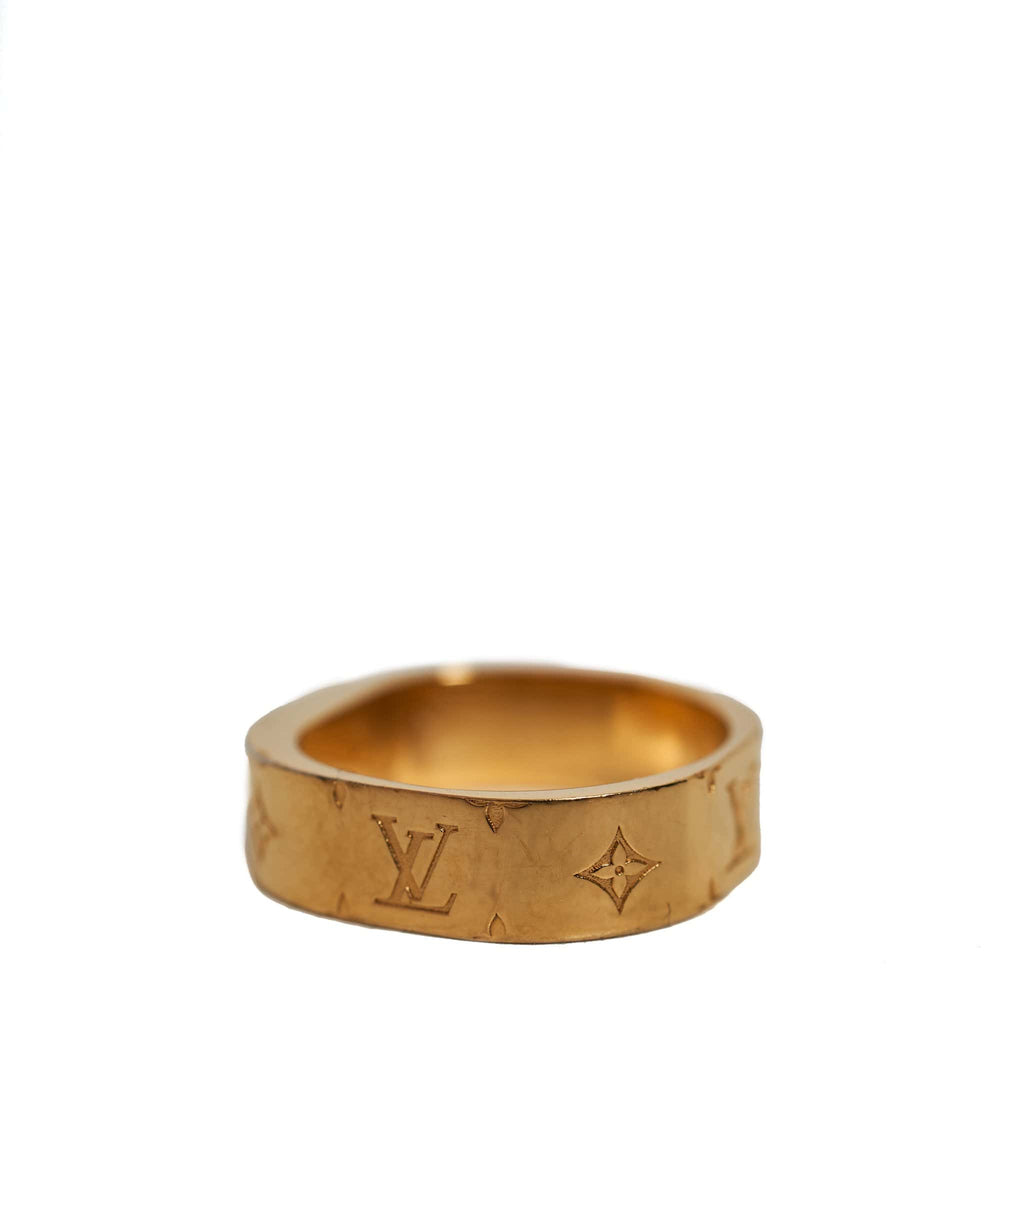 Louis Vuitton Monogram Signet Ring Gold in Gold Metal with Goldtone  US